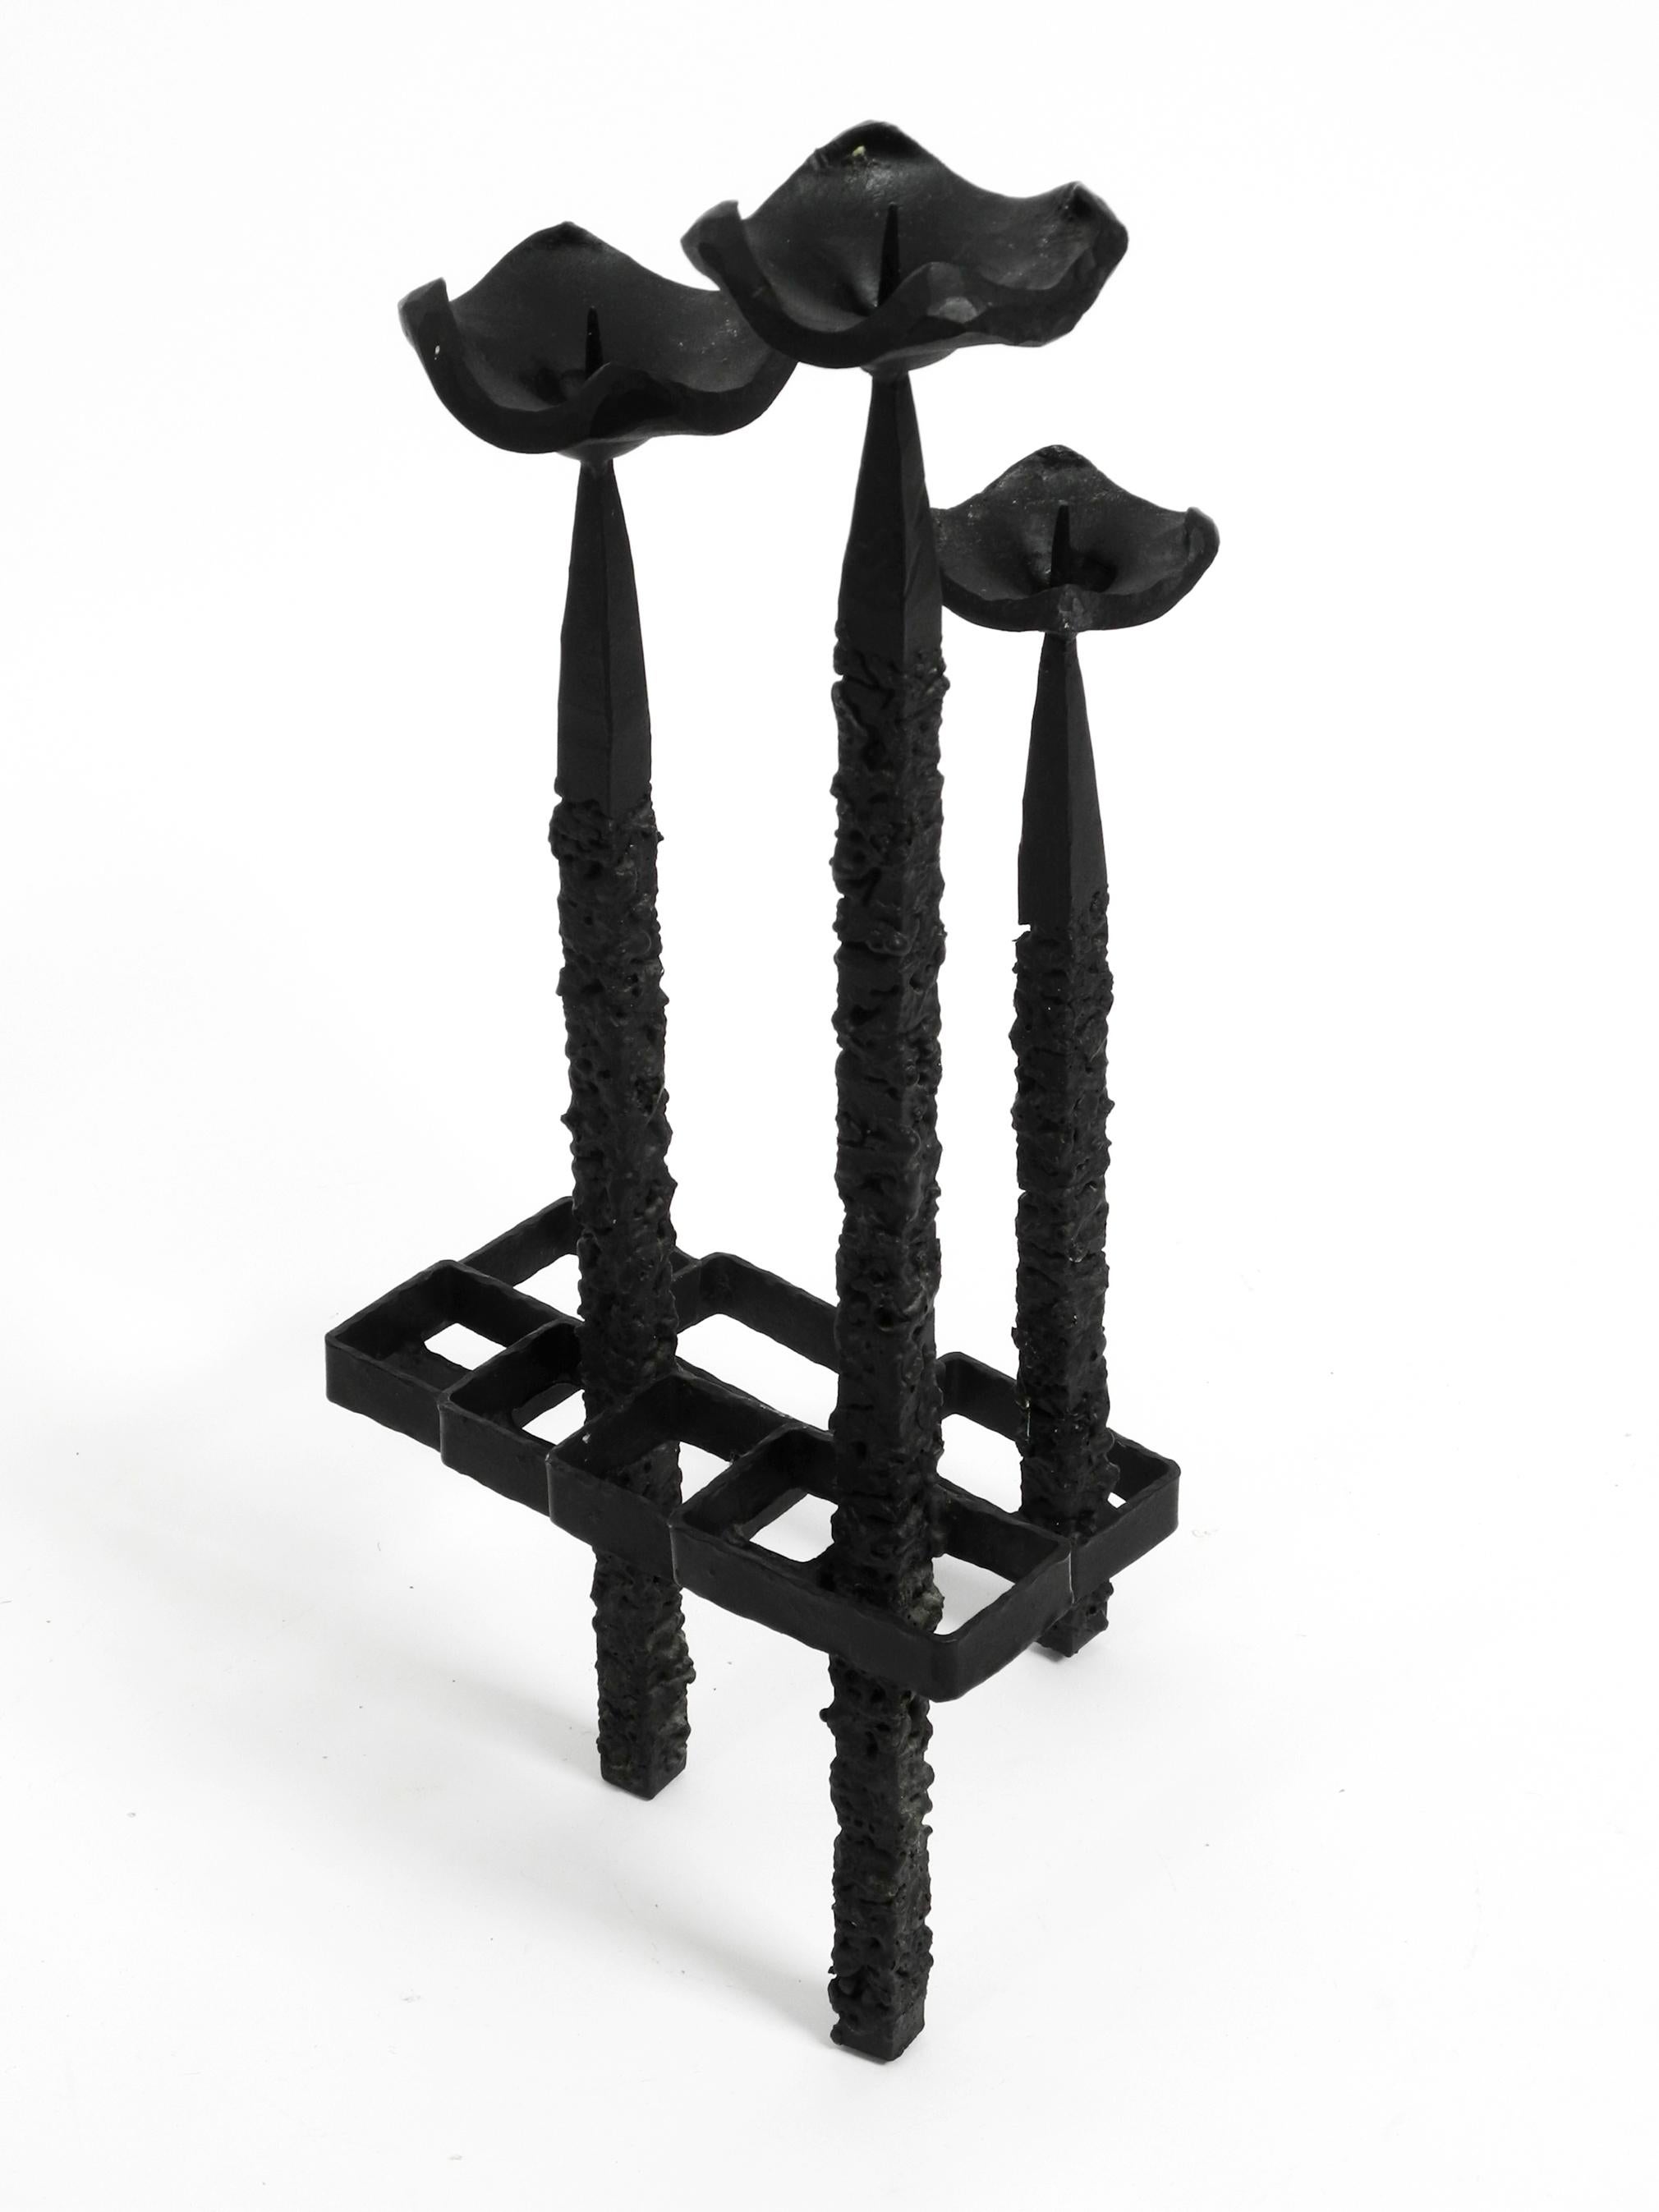 Large Floor or Table Candle Holder Made of Wrought Iron in Brutalist Design  For Sale 4